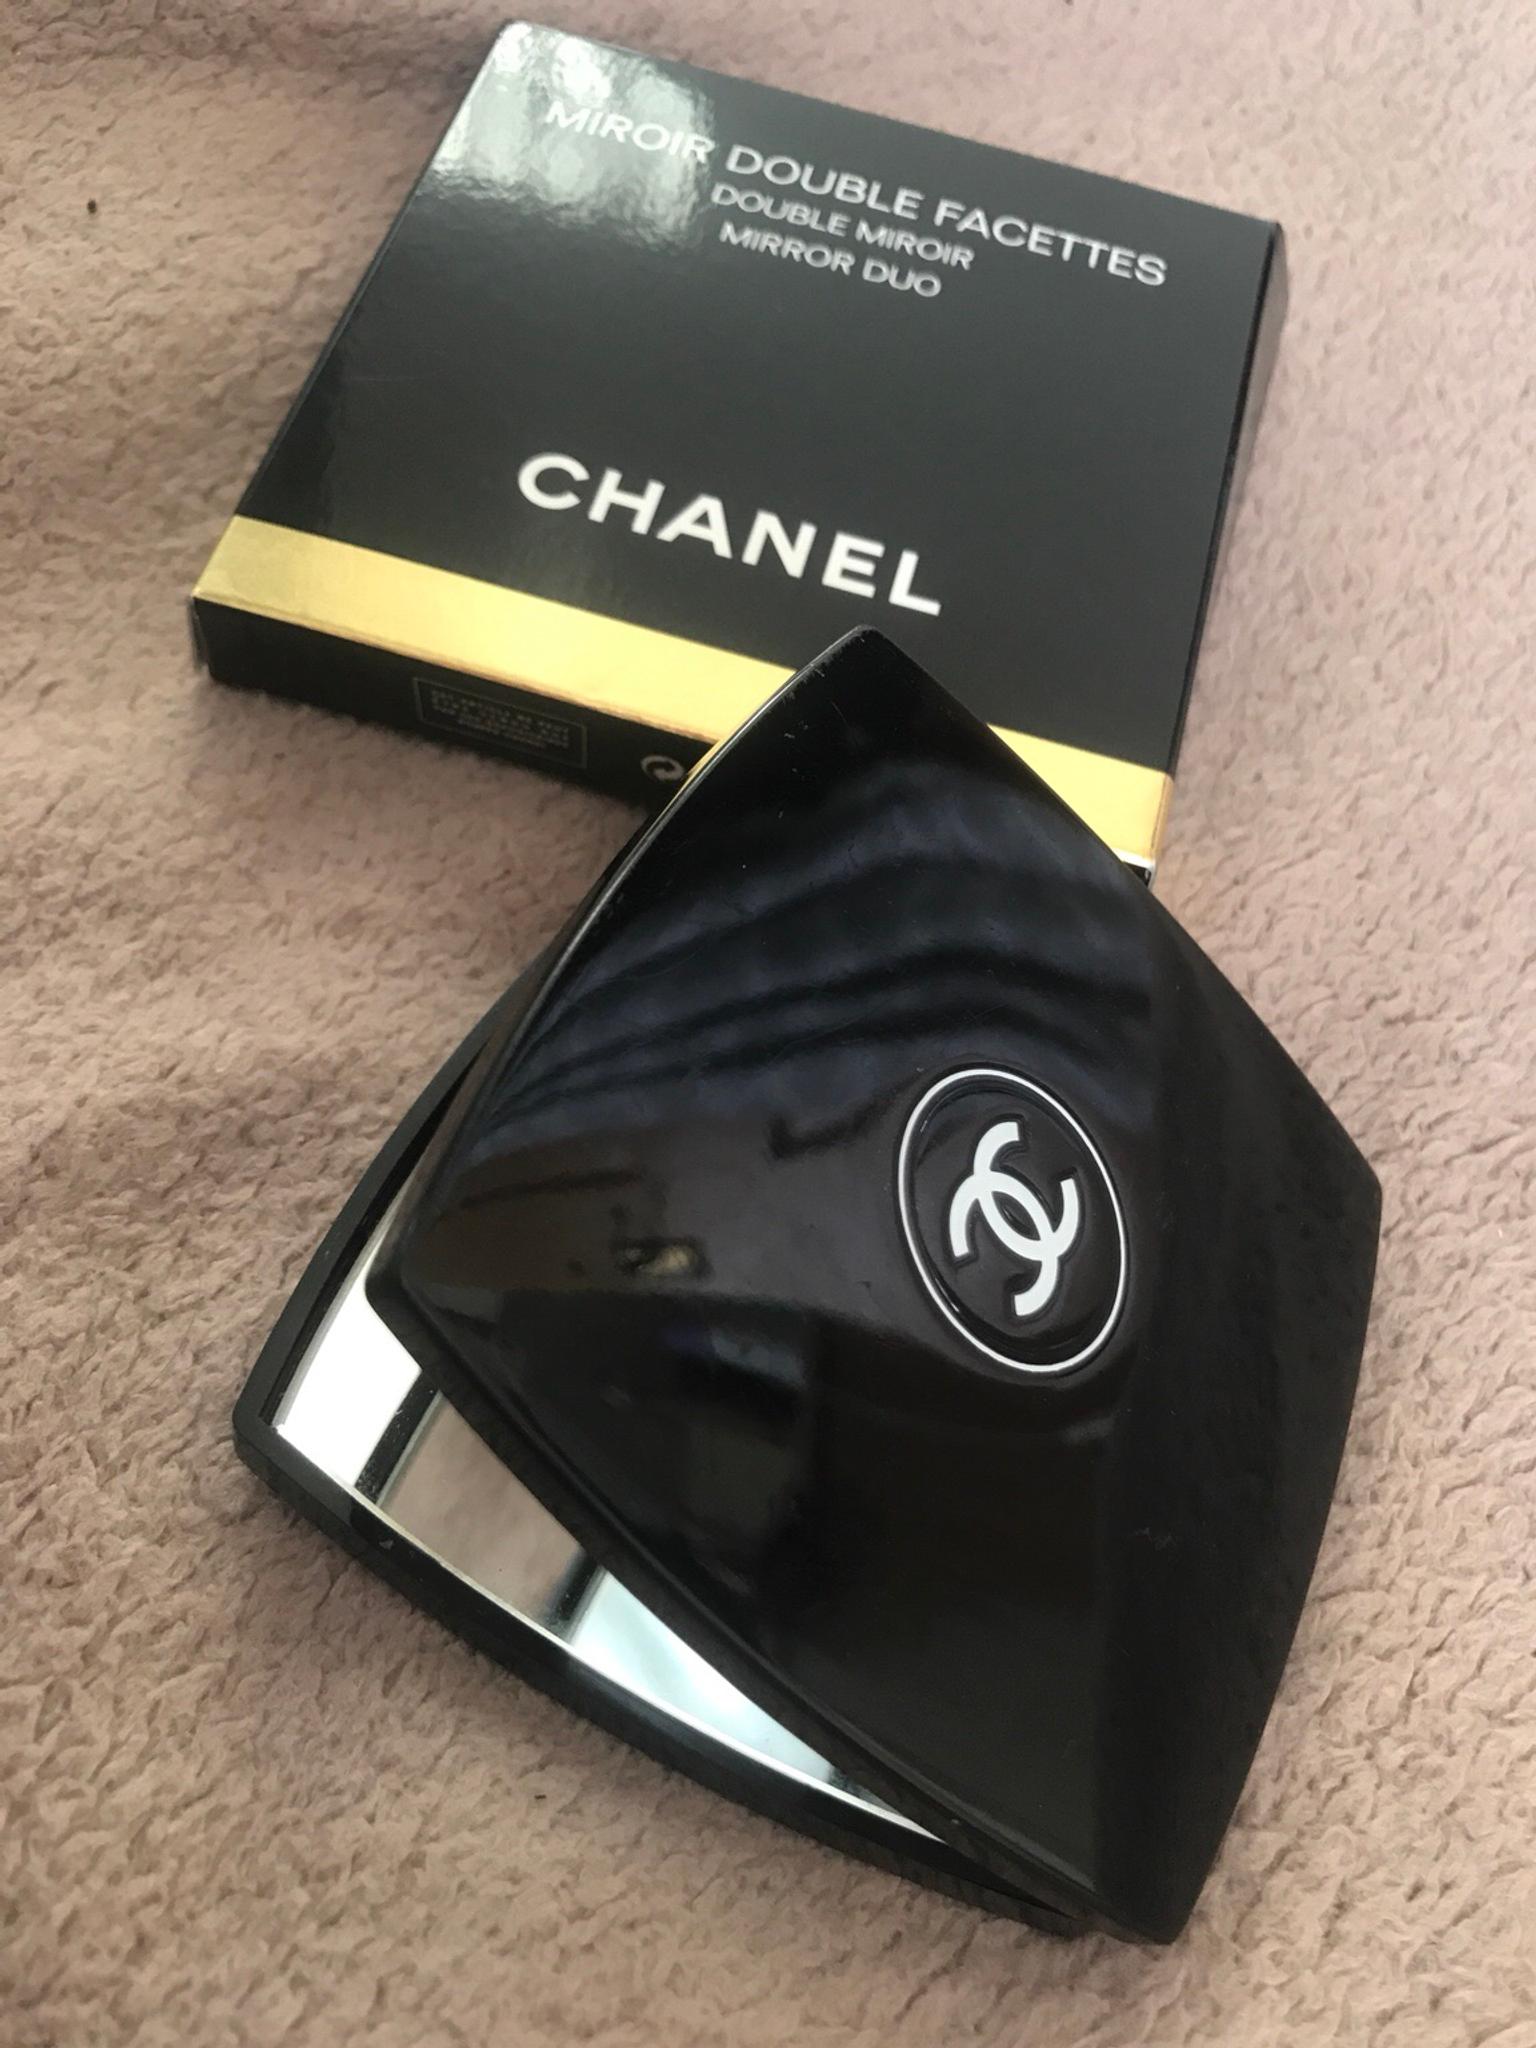 Chanel Duo Compact Mirror In Wv12 Walsall For 18 00 For Sale Shpock